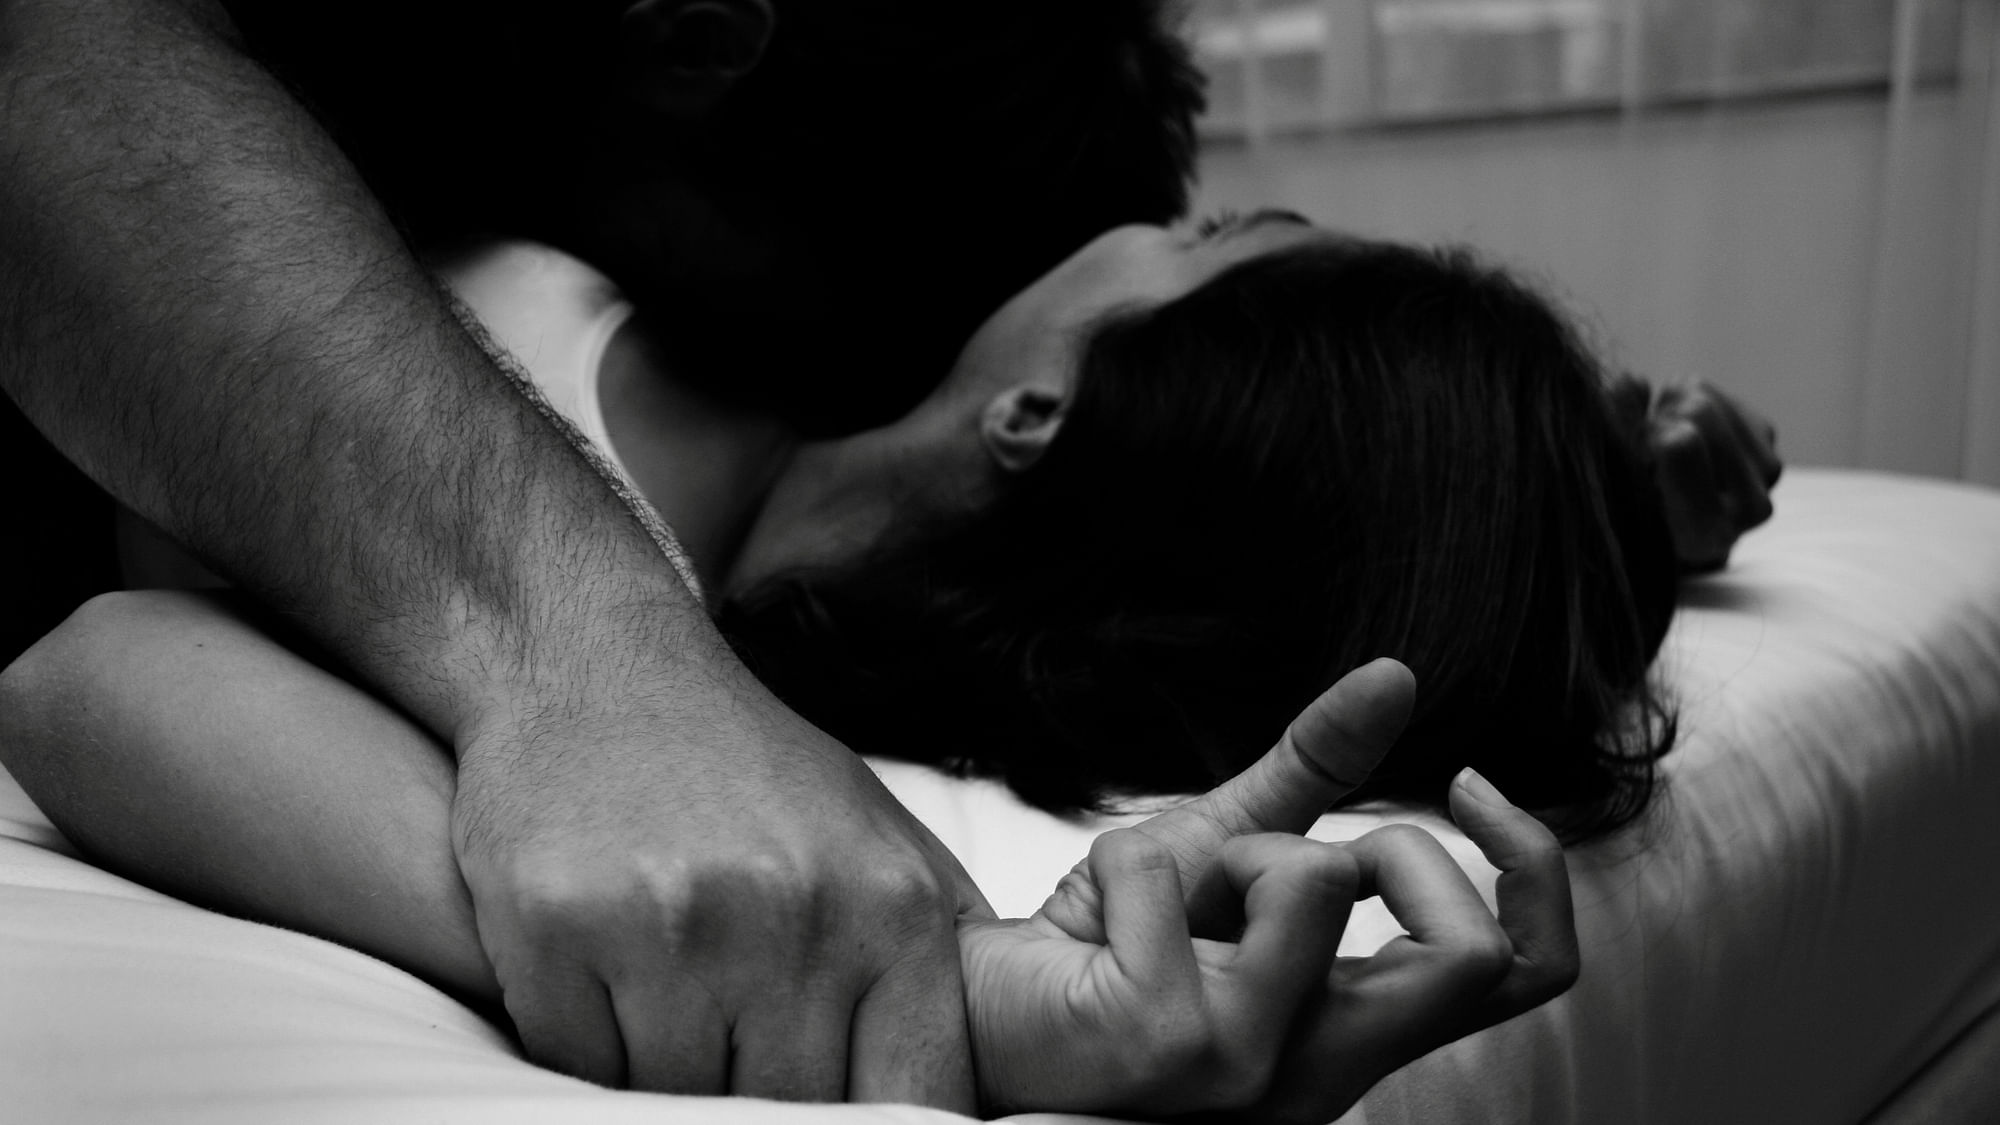 A Parliamentary panel has observed that if the issue of marital rape is brought under law, the entire family system will be under great stress. (Photo: iStockphoto)